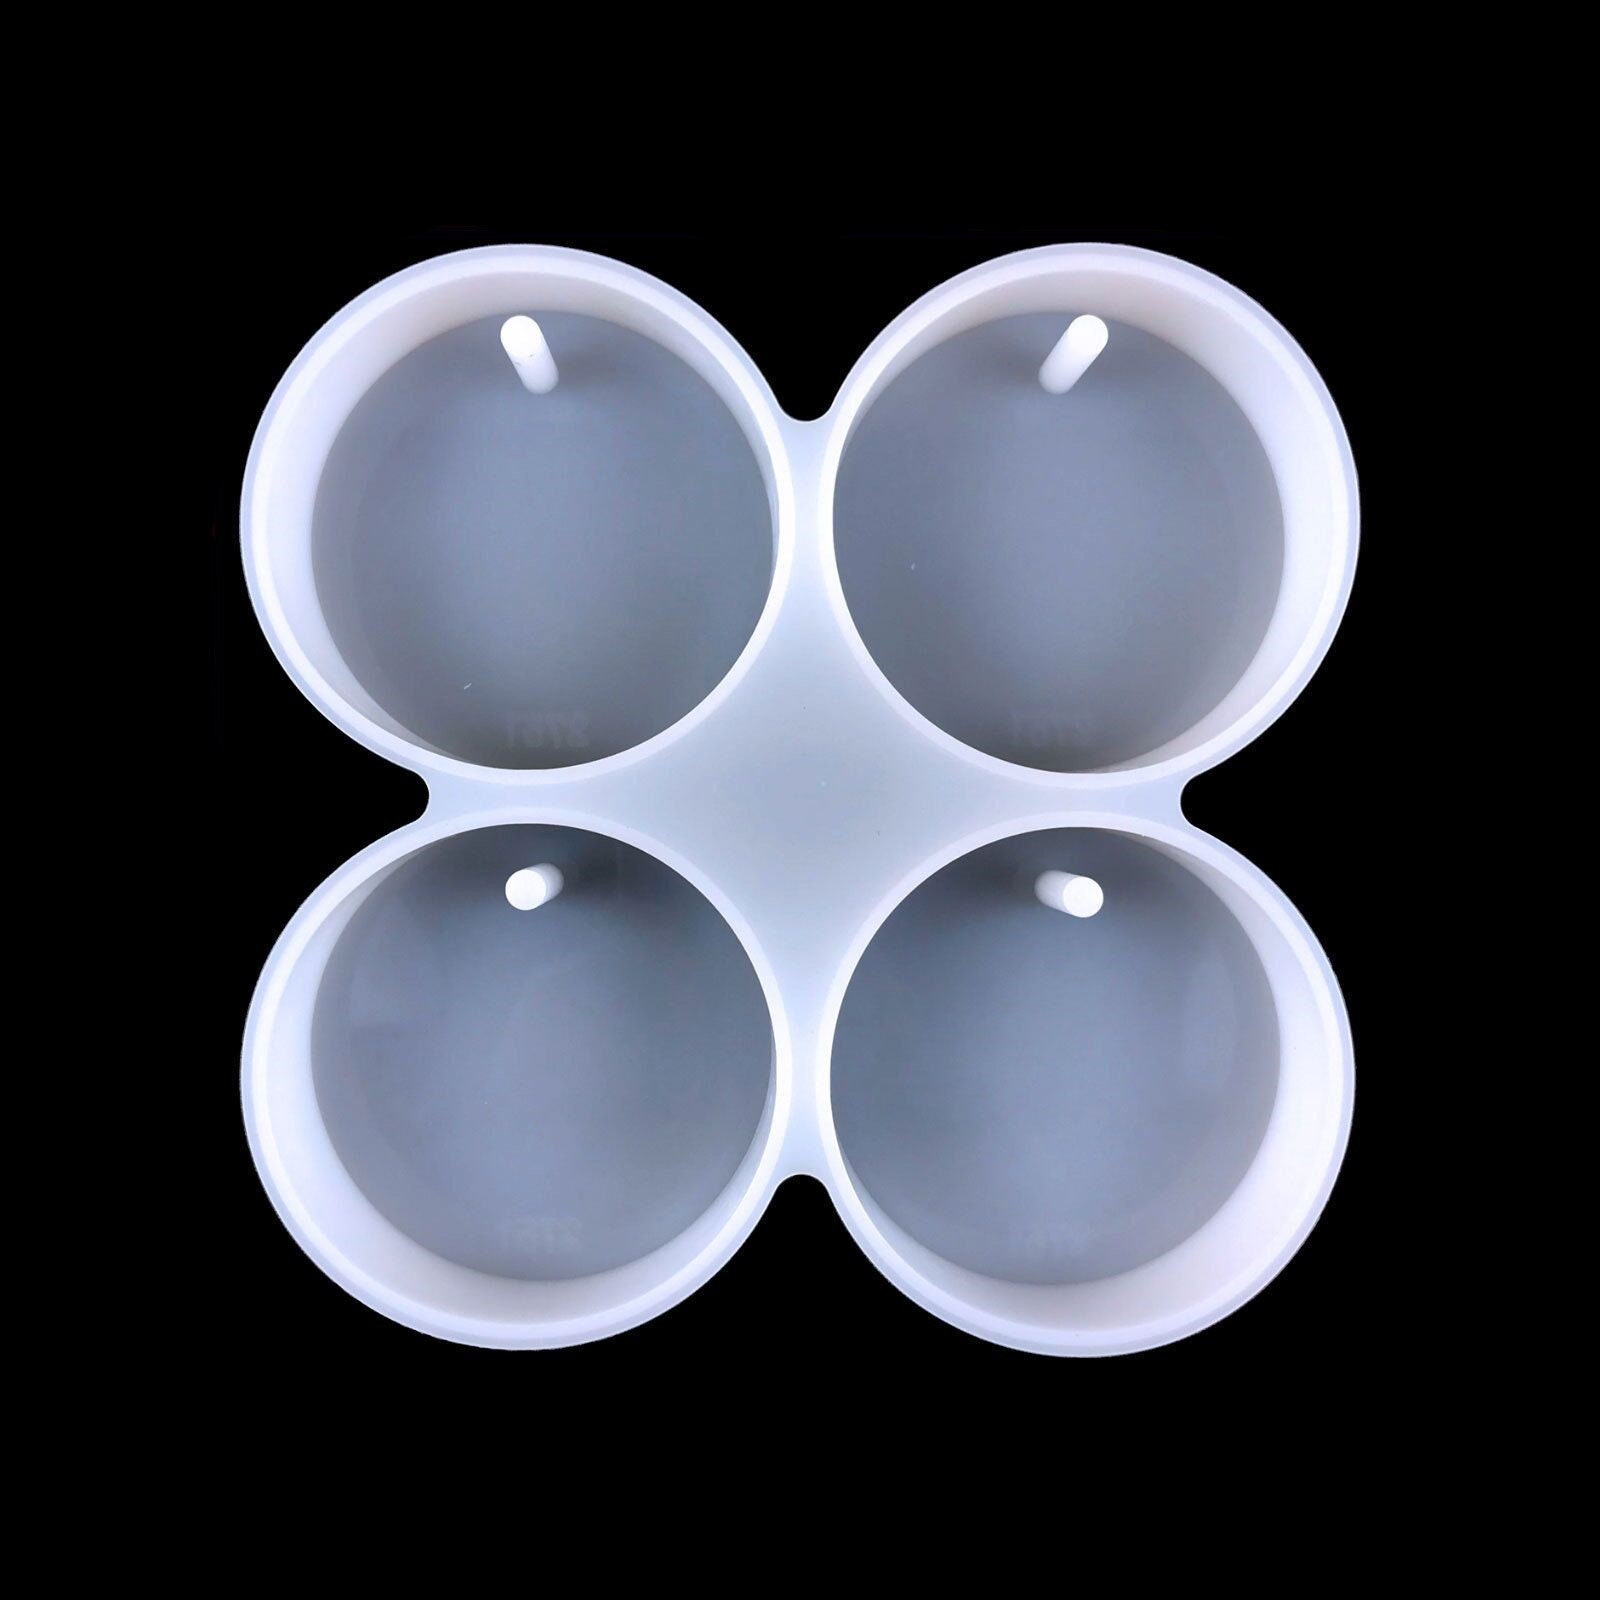 Silicone Bead Mold for Resin Set of 3 - JMKIT1411